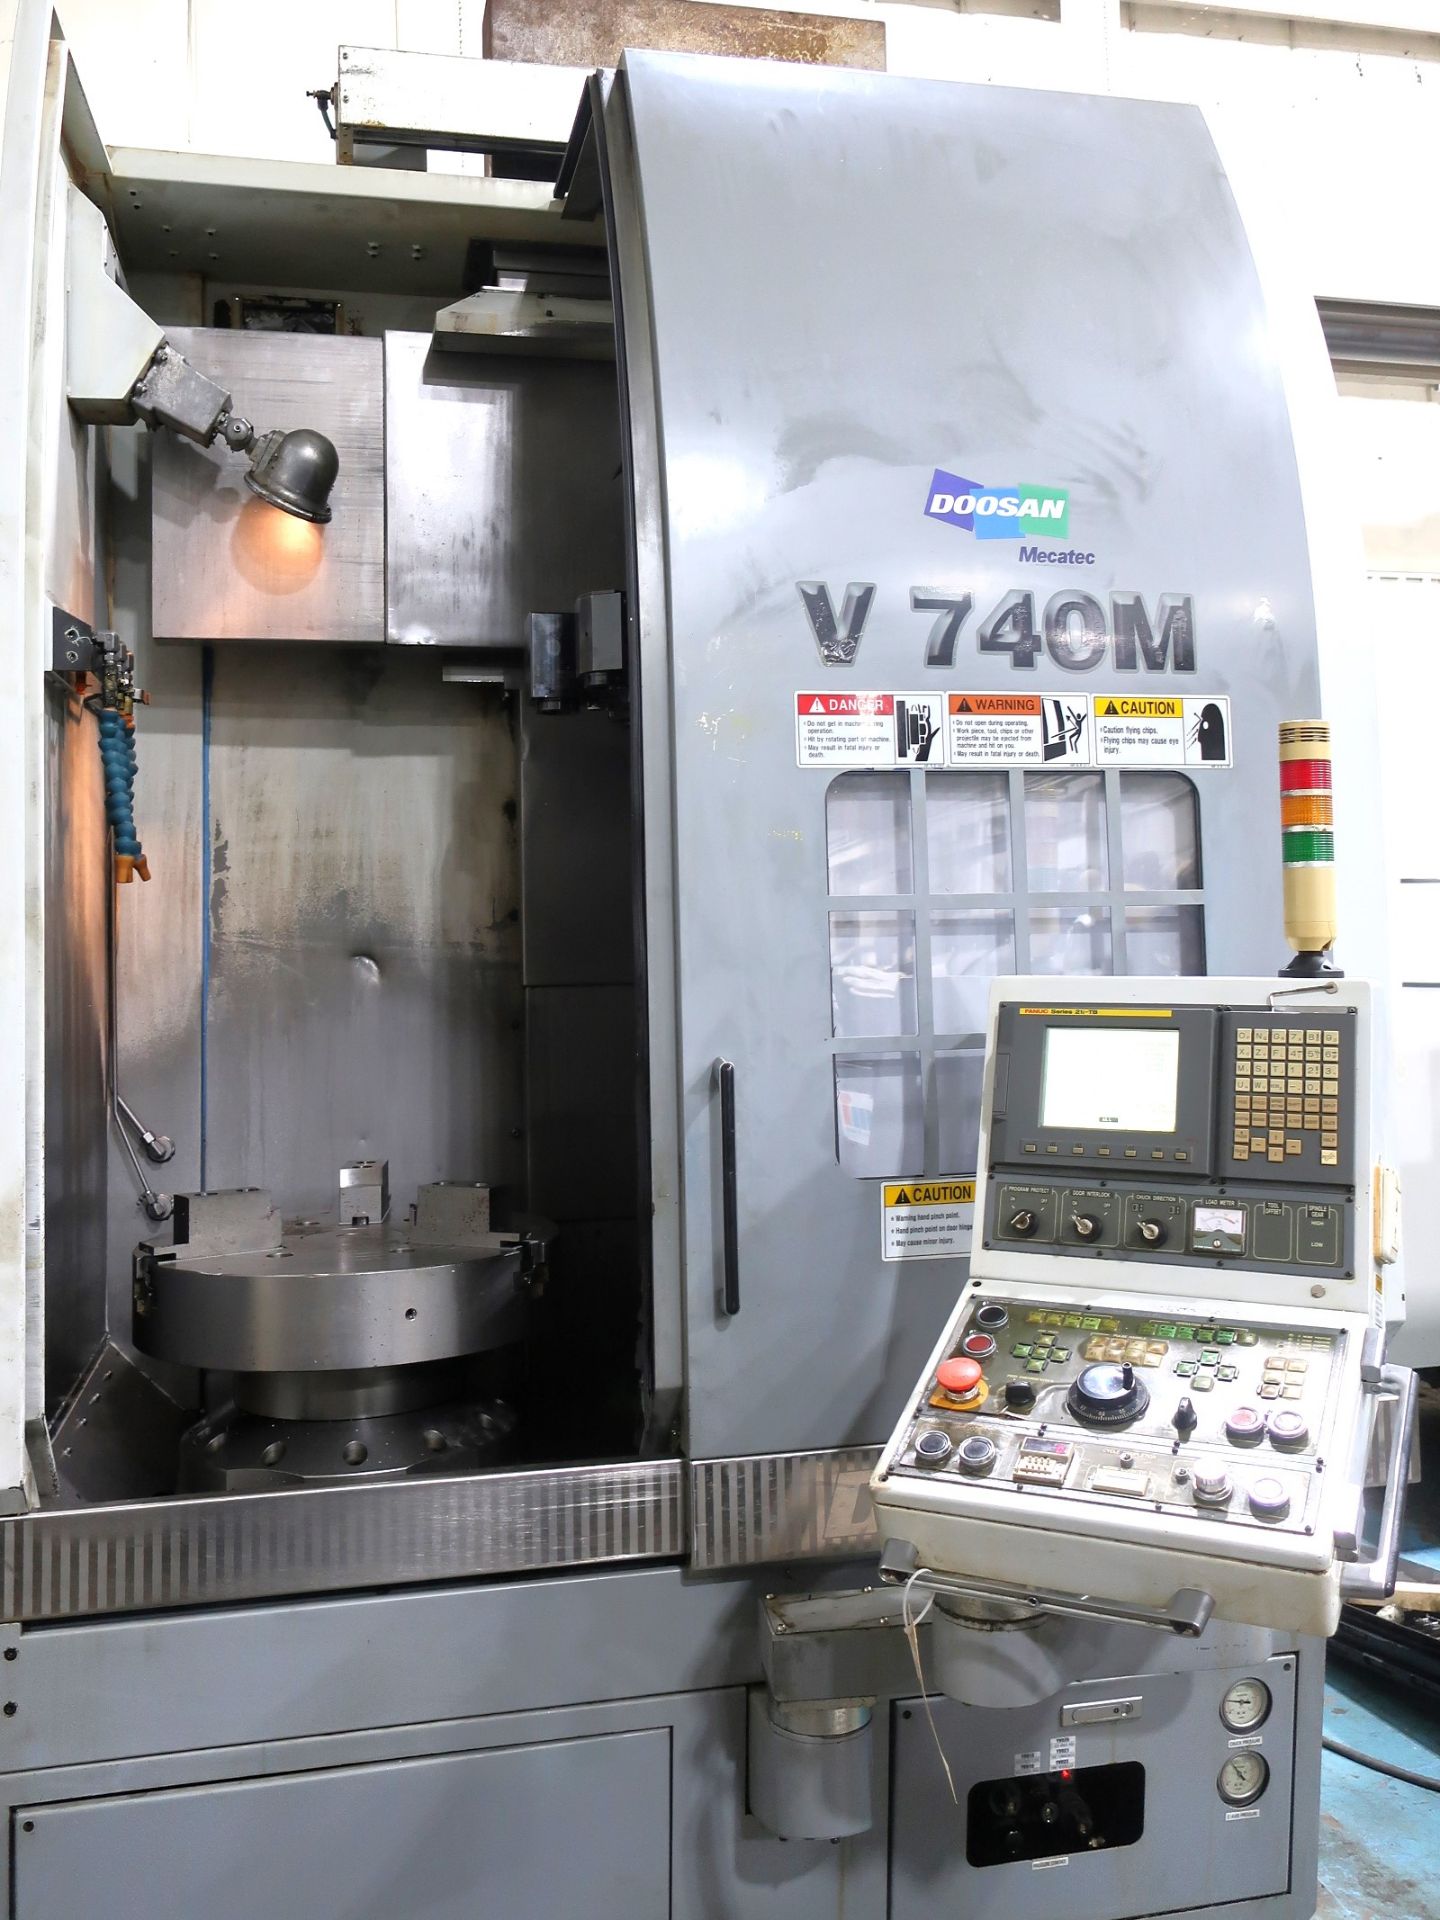 2006 24" Doosan V740M 3-Axis CNC Vertical Turning Center w/live tooling and C-axis, S/N 1013 - Image 13 of 13